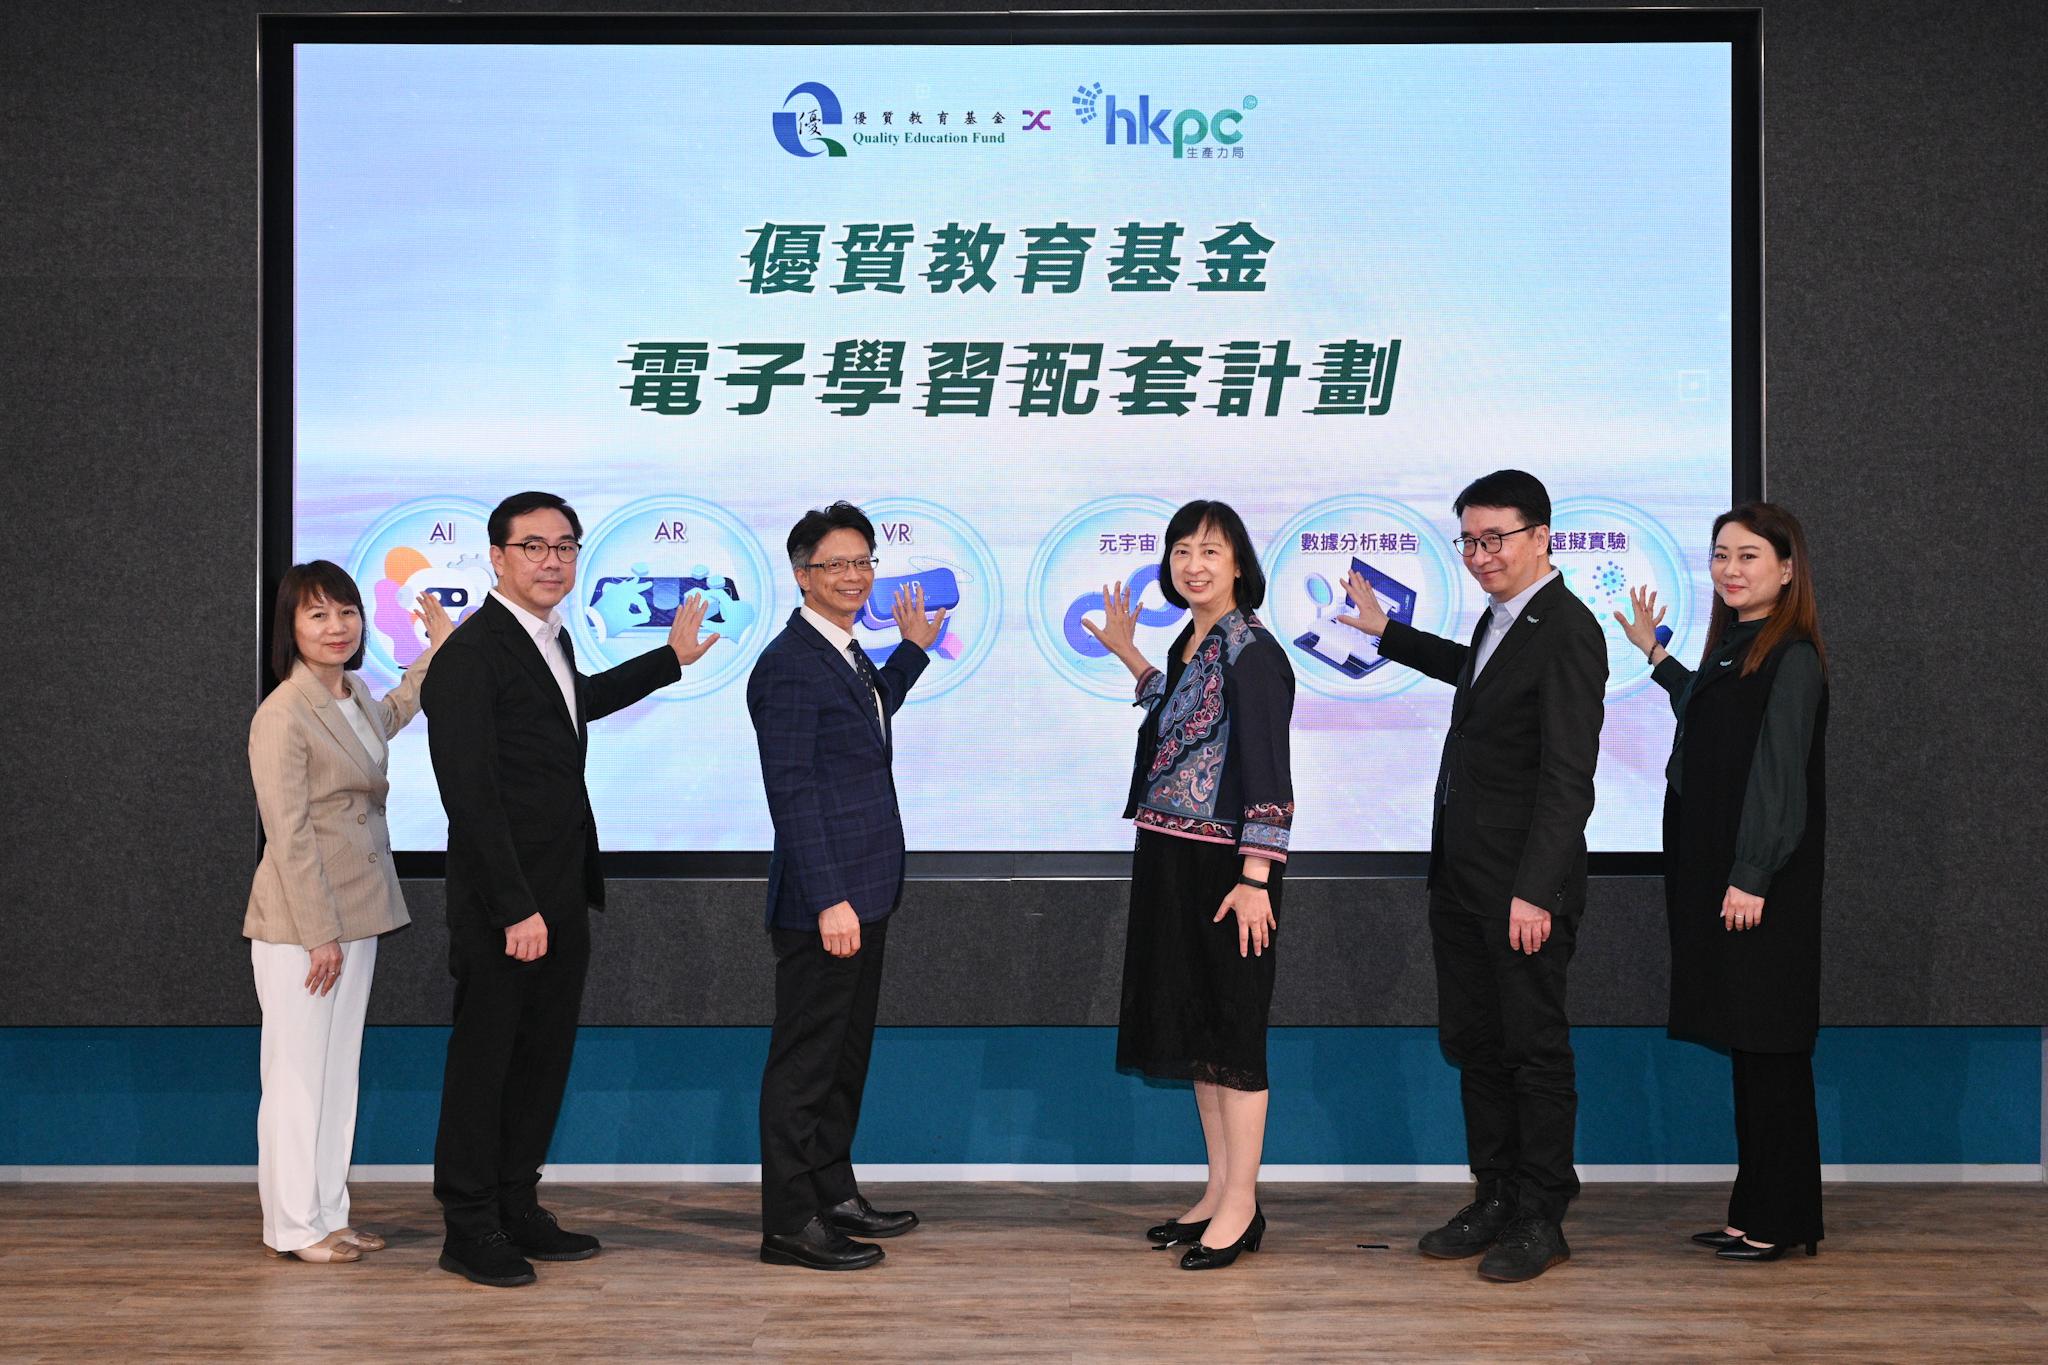 The Quality Education Fund and the Hong Kong Productivity Council held a launching ceremony for promoting the e-Learning Ancillary Facilities Programme today (July 28). Photo shows the Permanent Secretary for Education, Ms Michelle Li (third right), officiating at the launching ceremony with the Chairman of the Quality Education Fund Steering Committee, Dr Gordon Tsui (third left), the Chief Innovation Officer of the Hong Kong Productivity Council, Dr Lawrence Cheung (second right), and other guests.